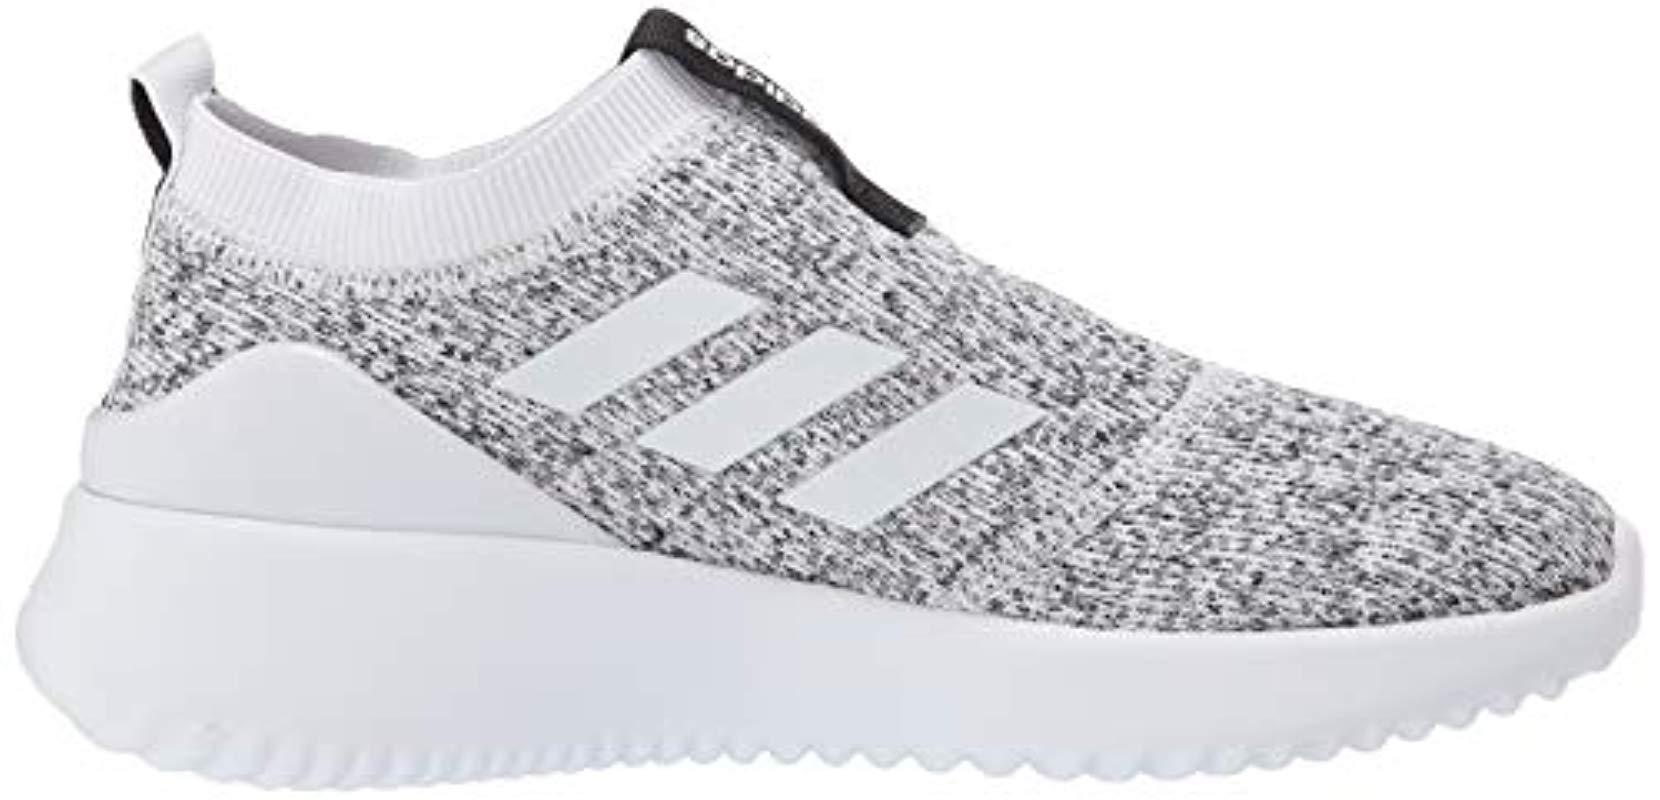 Adidas Ultimafusion Sneakers Online, SAVE 45% - aveclumiere.com